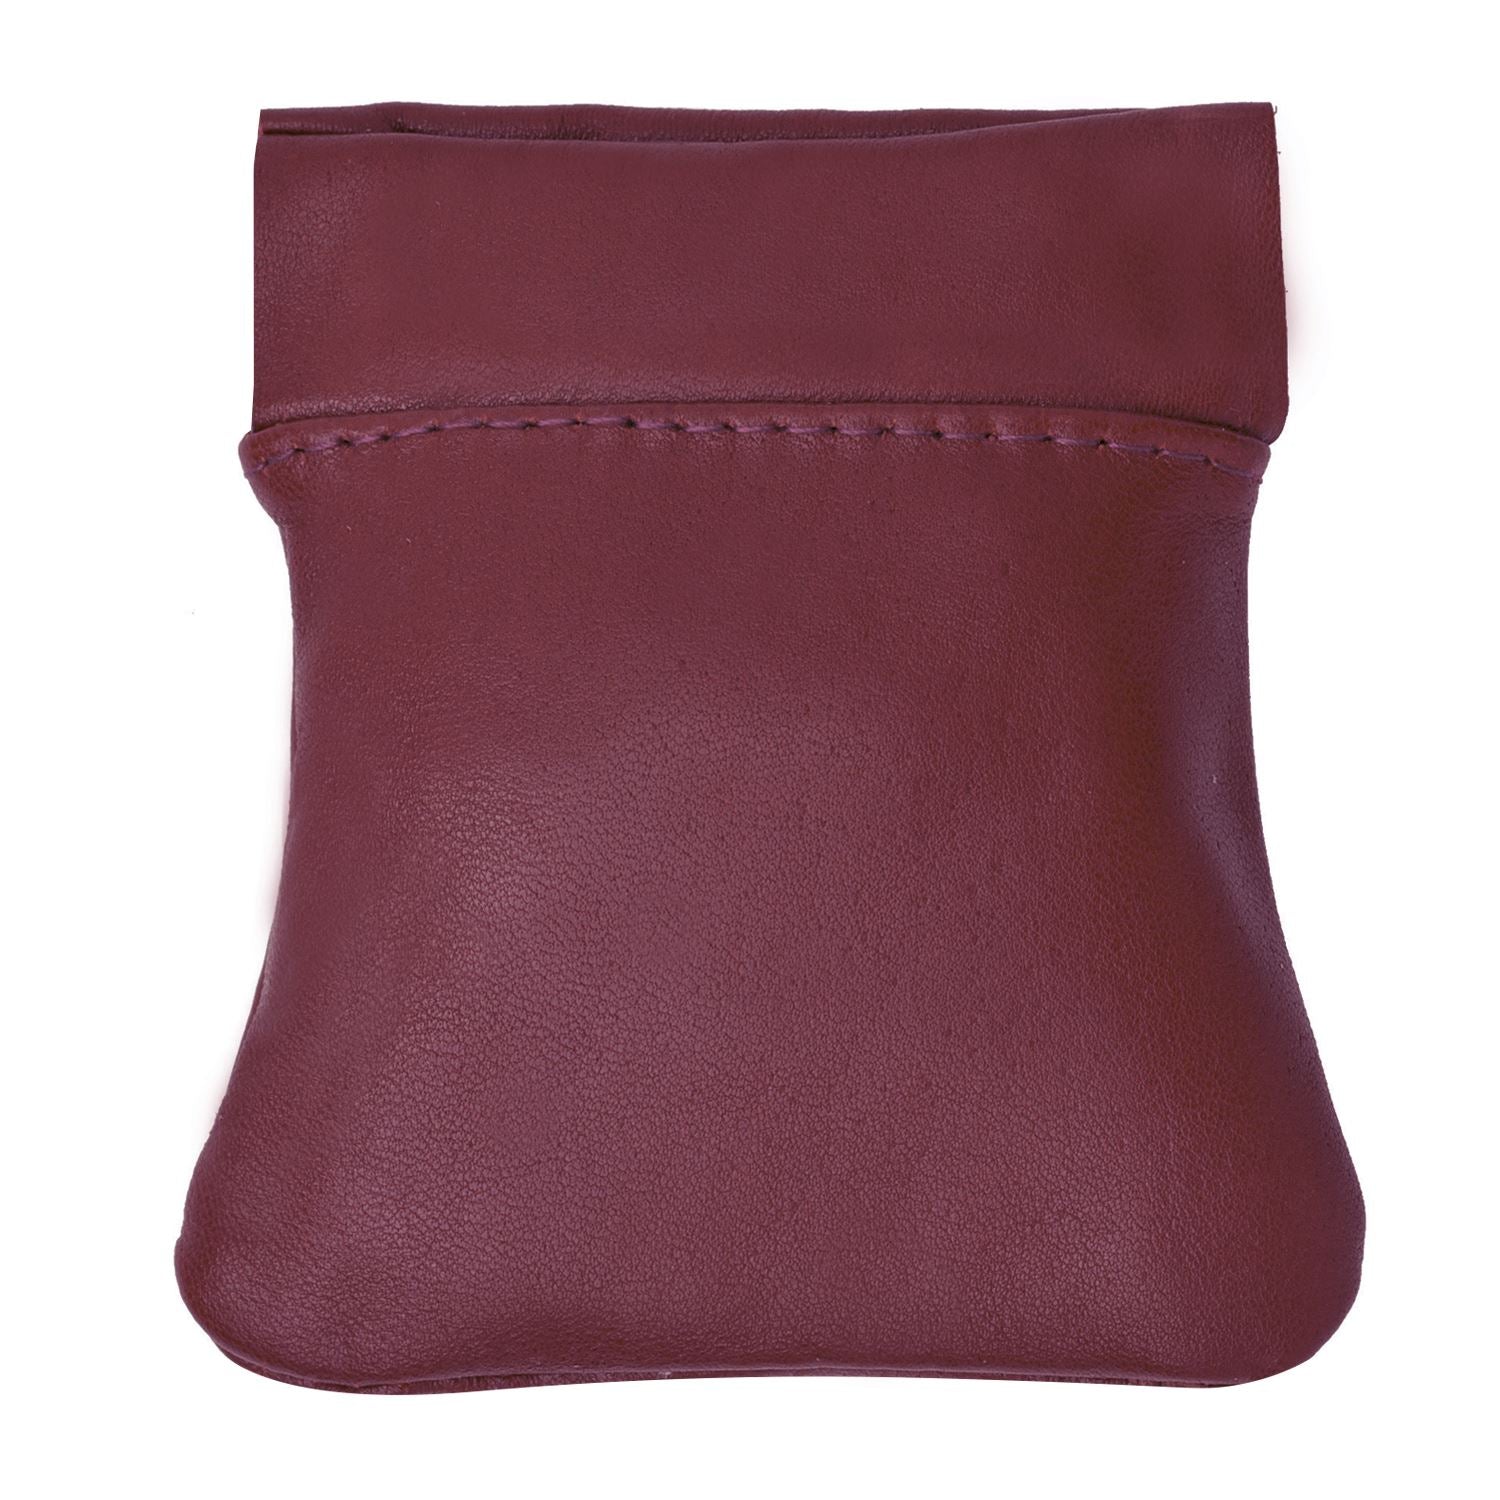 Classic Leather Squeeze Coin Purse change Holder For Men, Pouch size 3.5 in  X 3.25 in. high, Burgundy 